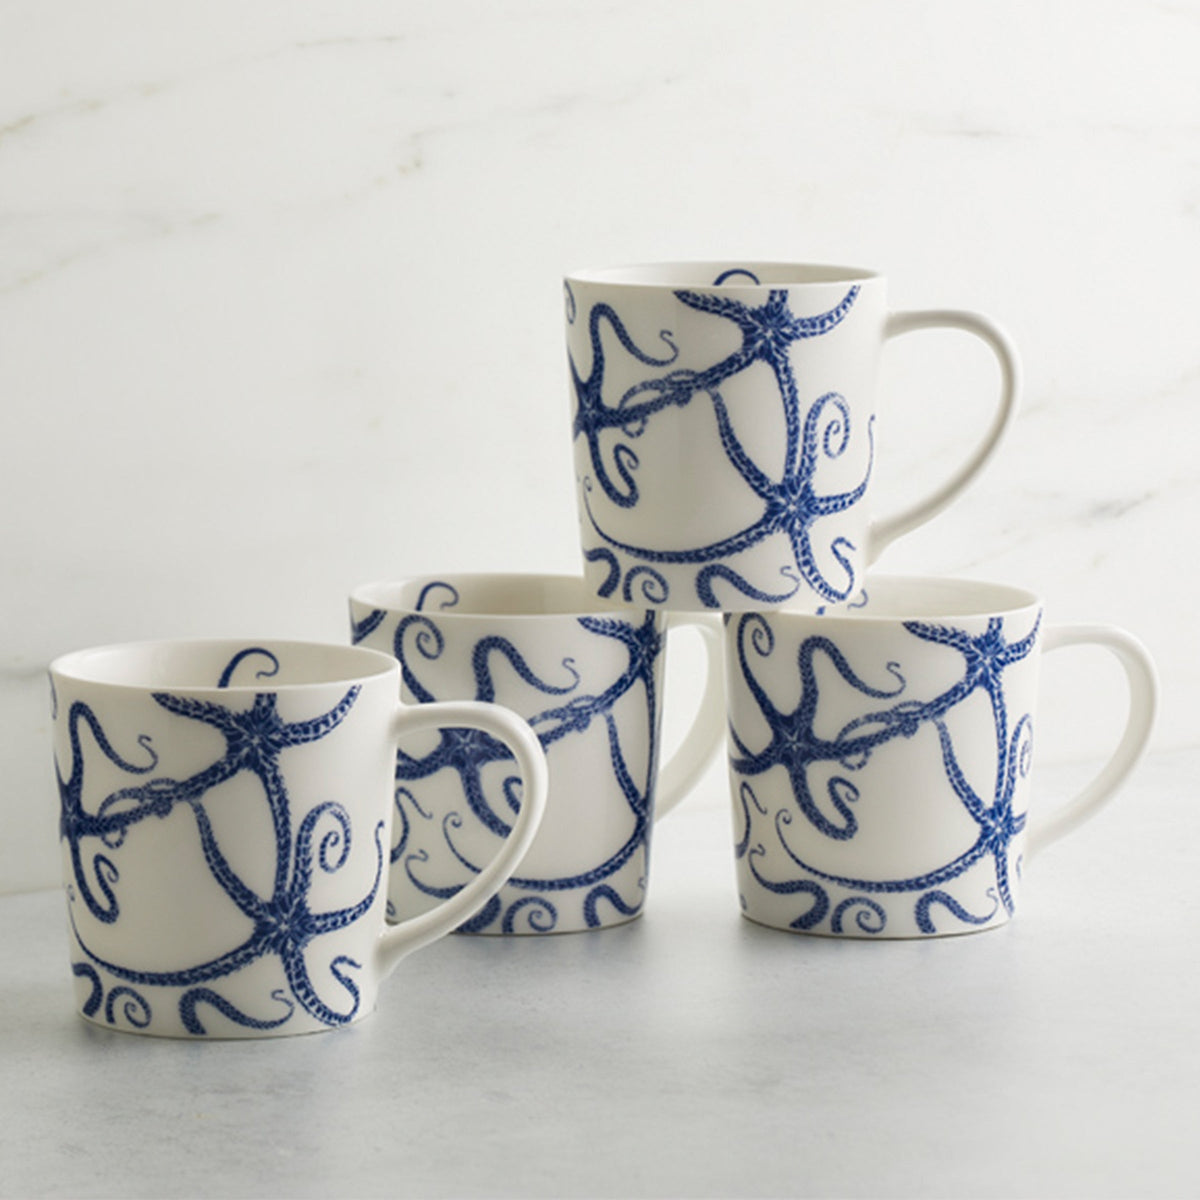 Four high-fired porcelain mugs with blue octopus designs stacked on a gray surface against a white marble background. These dishwasher-safe Starfish Mugs by Caskata Artisanal Home add a touch of marine charm to your kitchen.